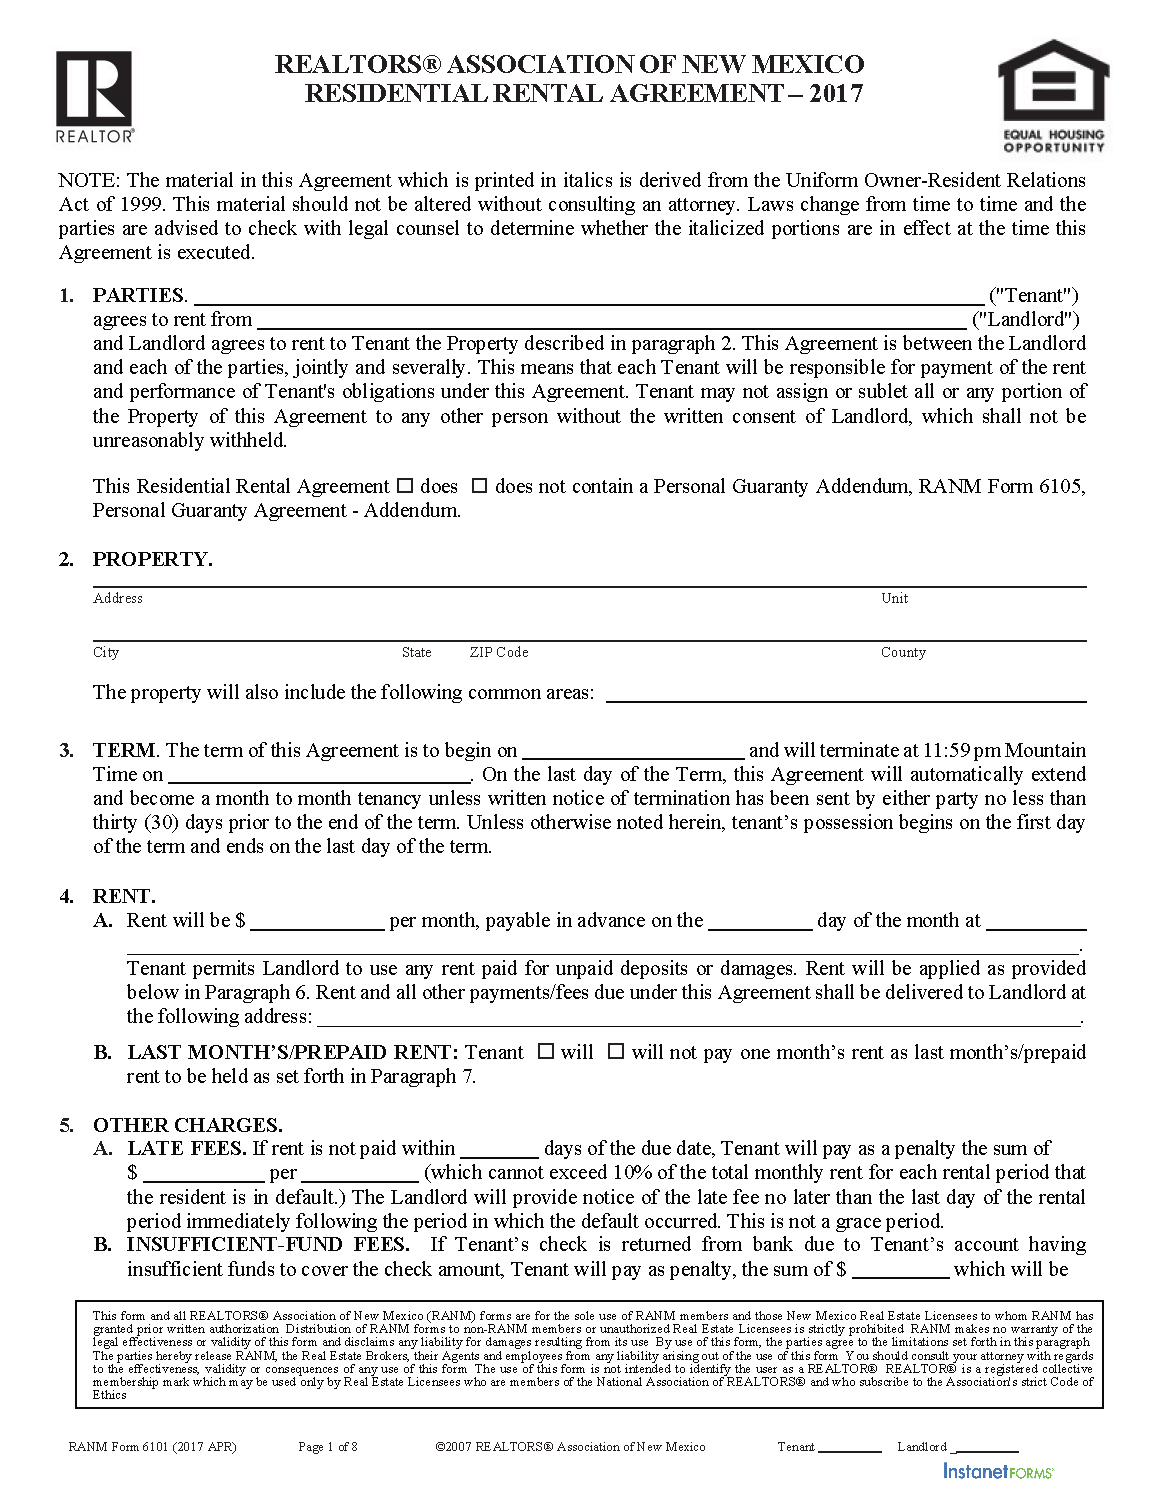 Simple Rental Agreement Form New Mexico